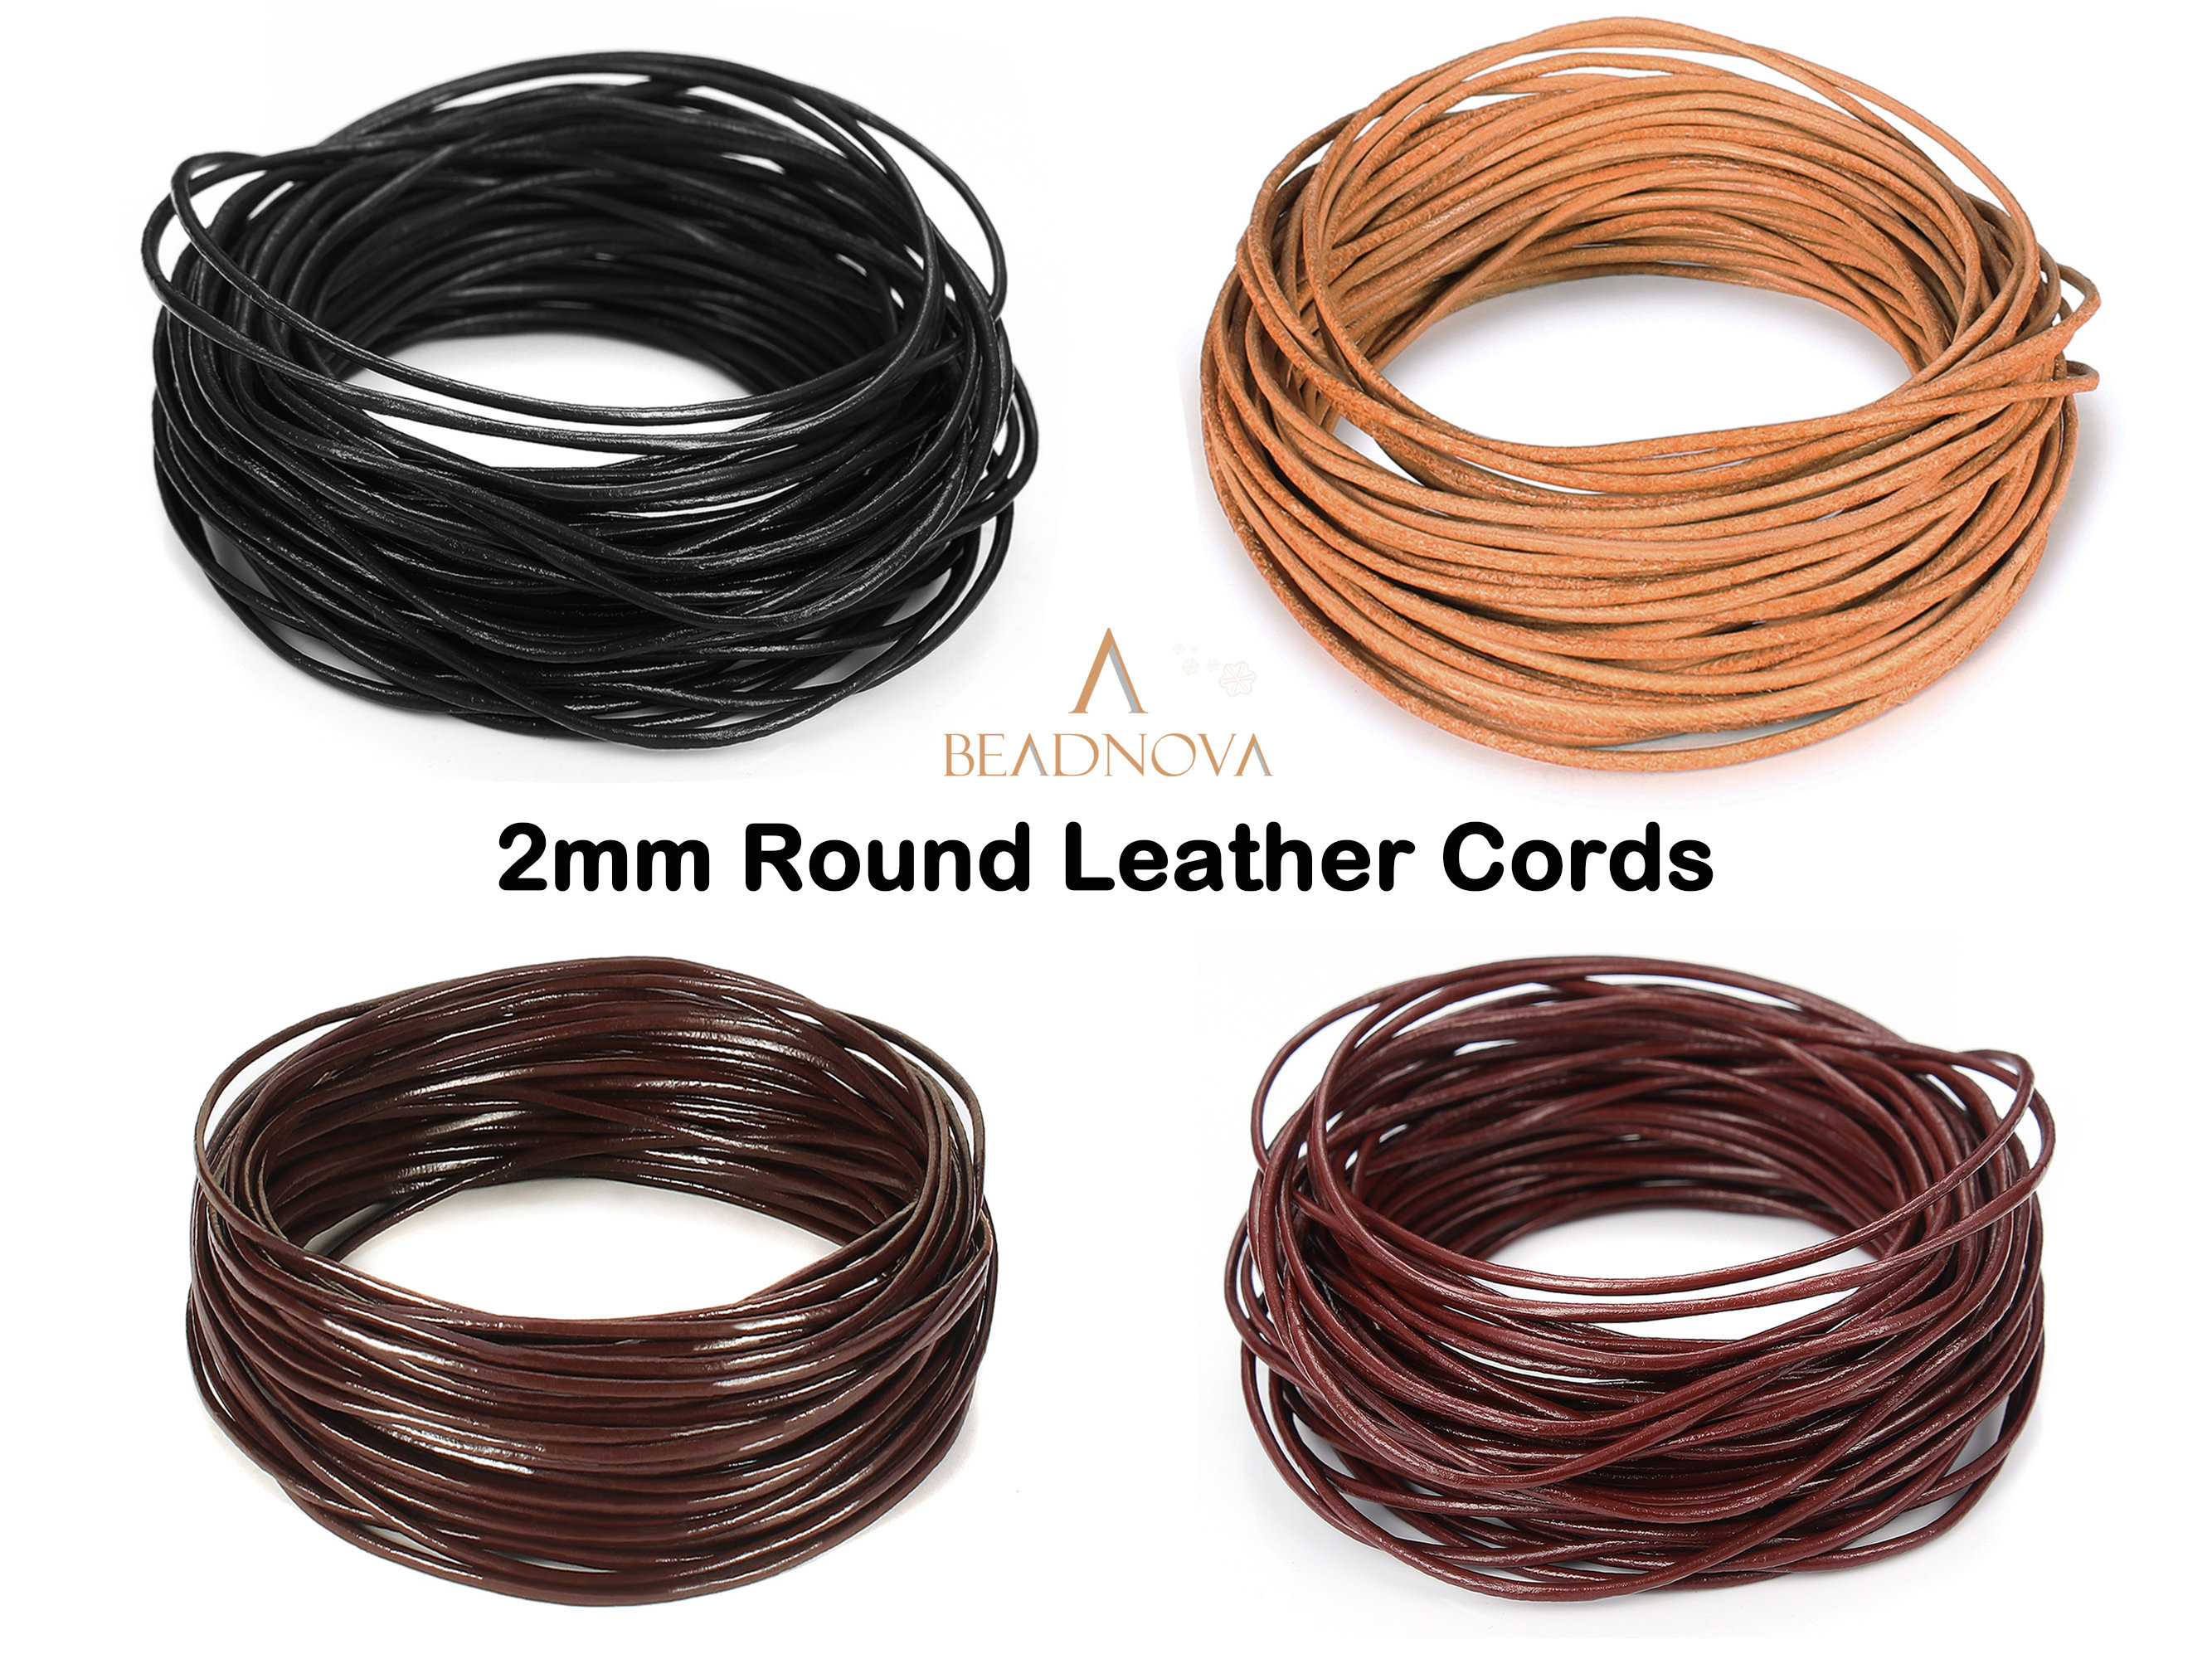 2mm Genuine Round Leather Cords 10m 11 Yards Black Brown Leather